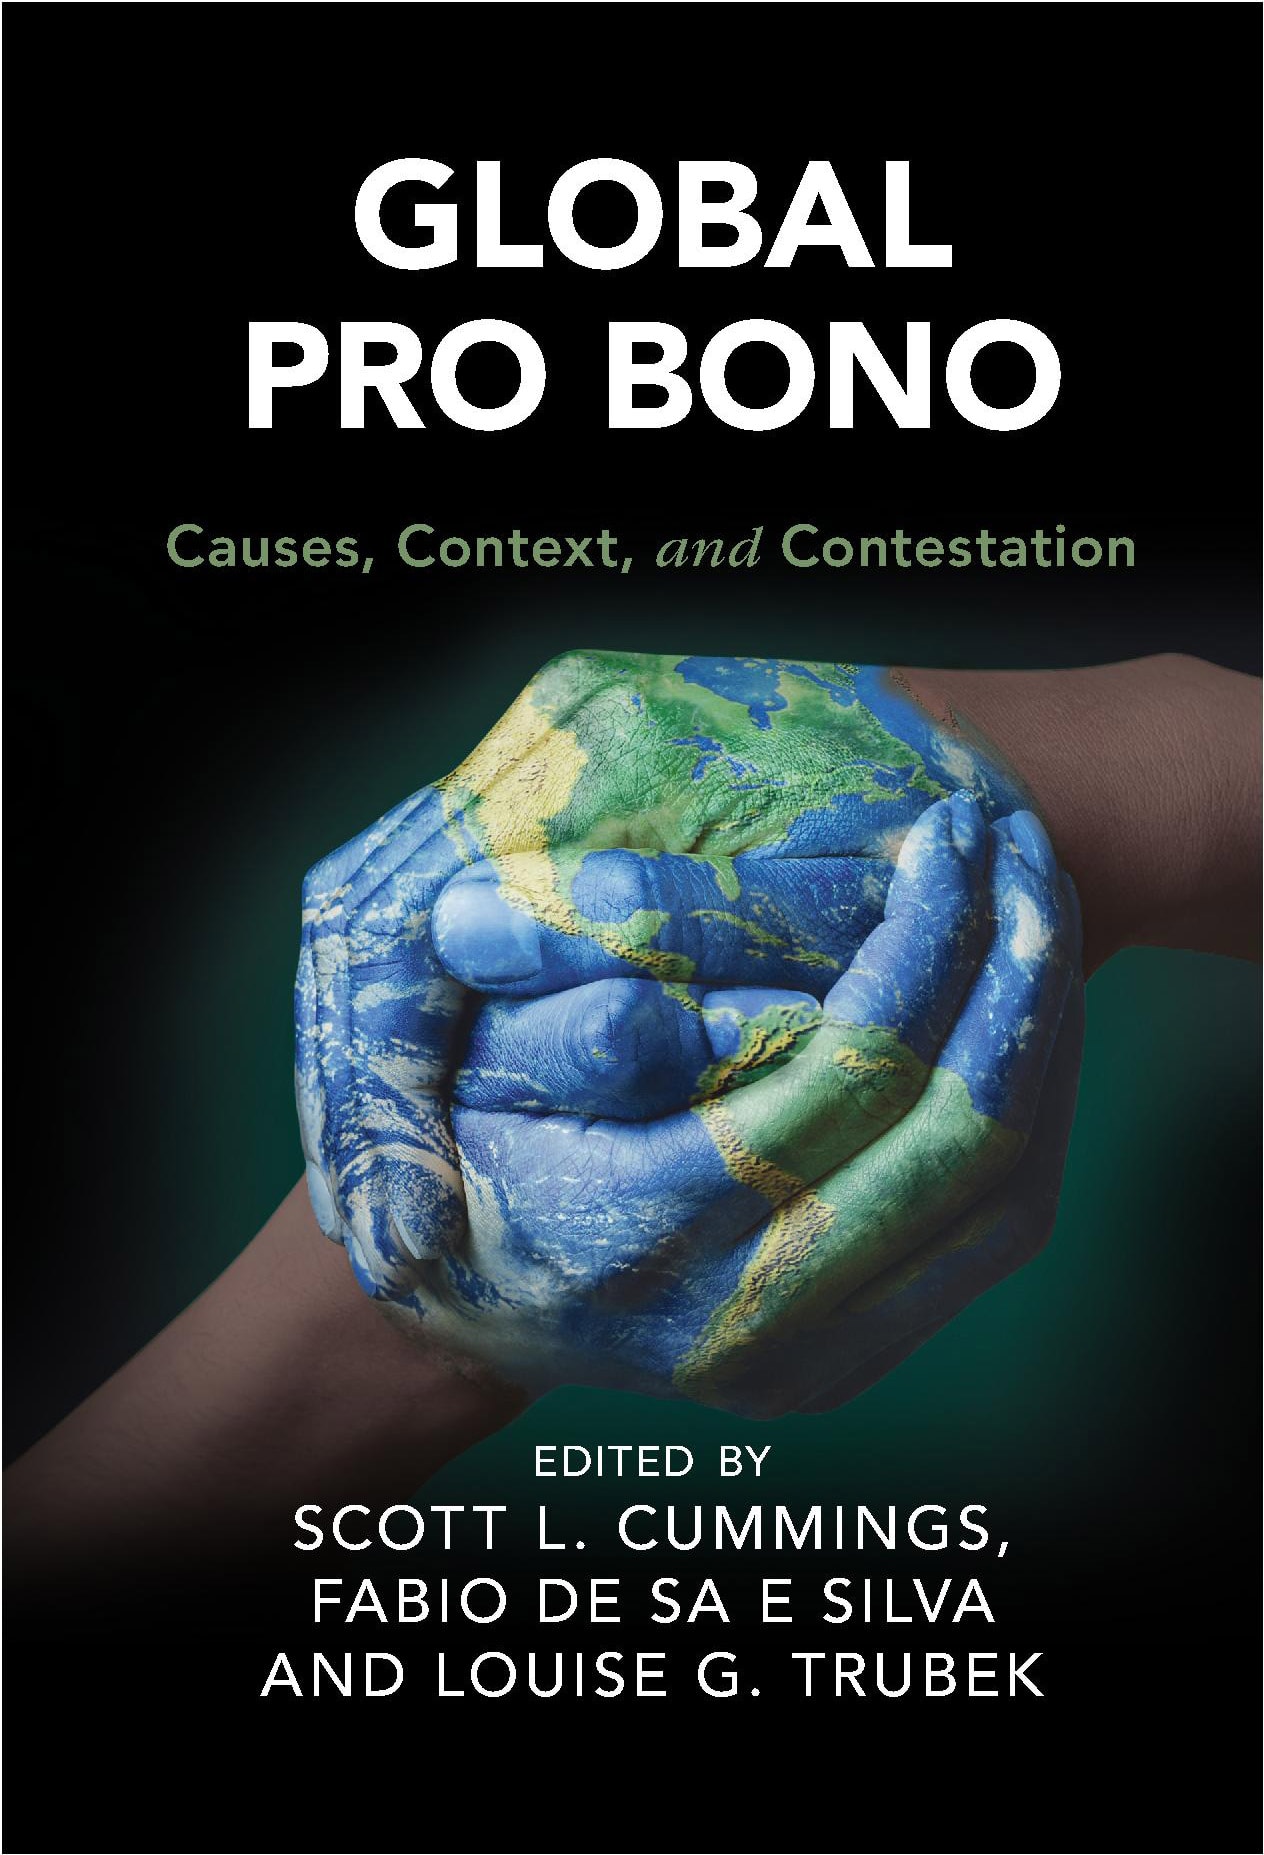 Global Pro Bono: Causes, Consequences, and Contestation edited by by Scott L. Cummings, Fabio De Sa E Silva, and Loiuse G. Trubek